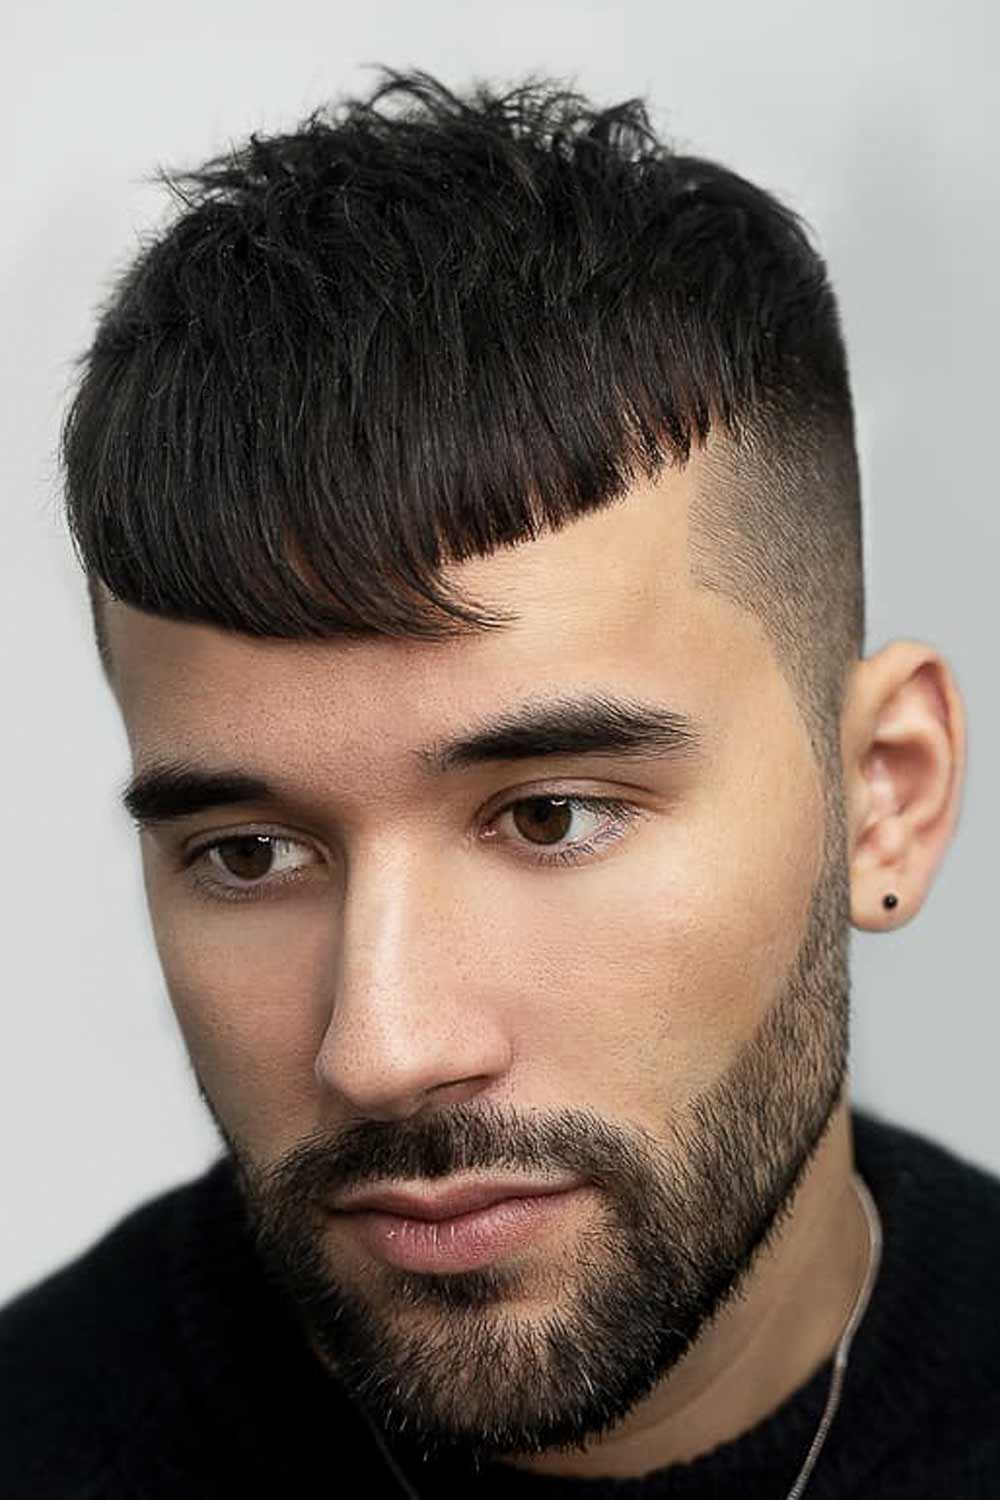 Angular Fringe Haircut Men #frenchcrophaircut #frenchcrop #croptop